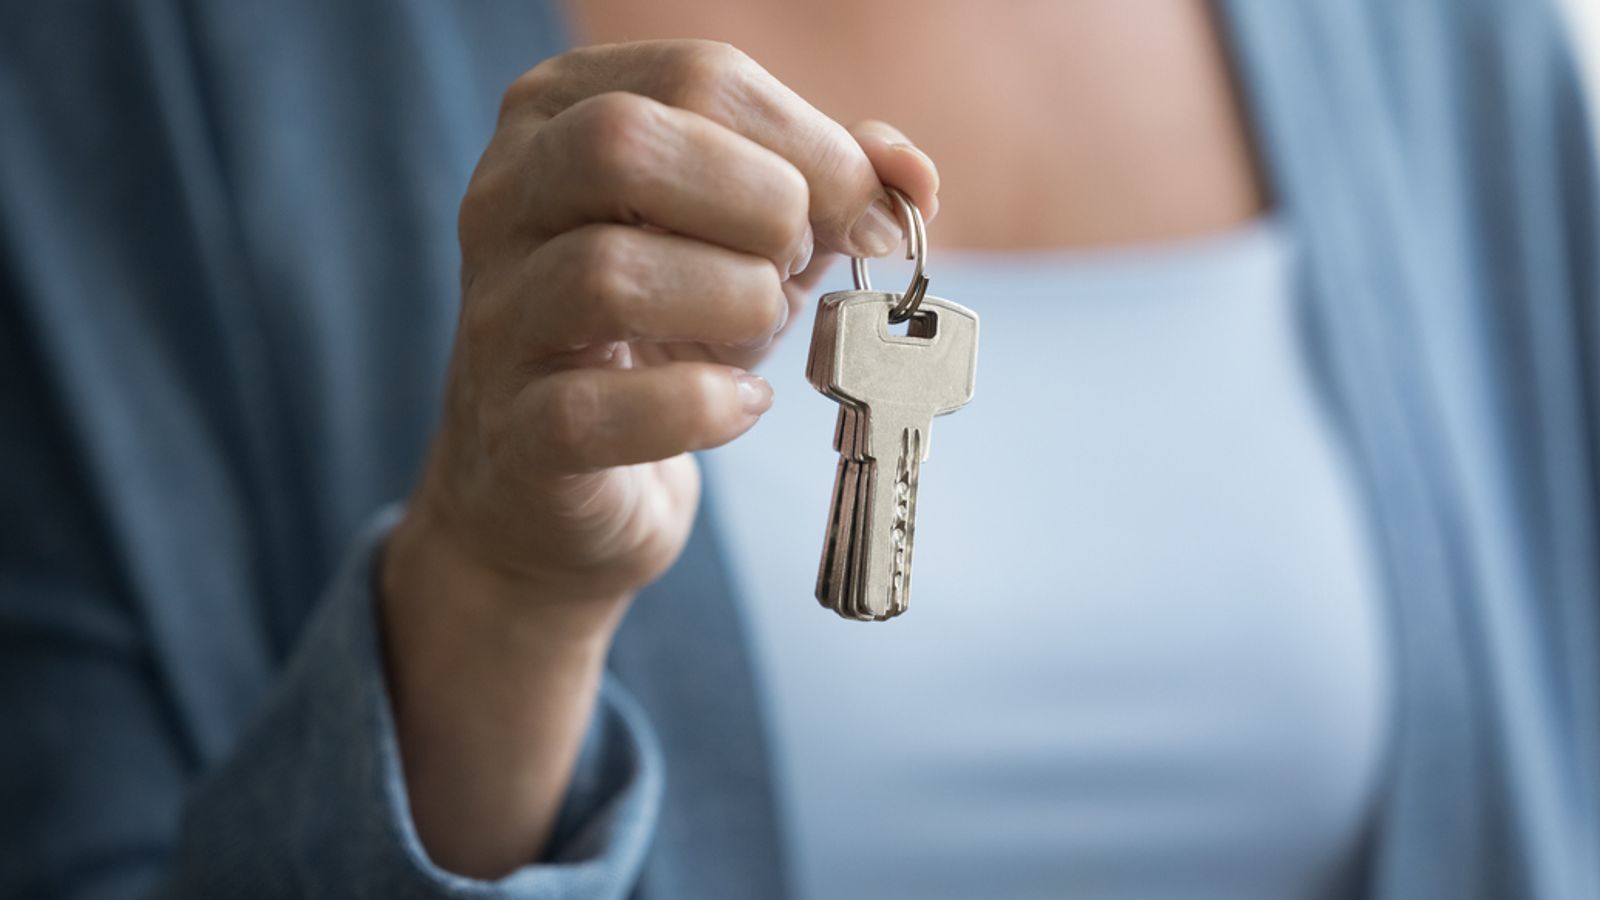 Jump in mortgage arrears and 11% rise in buy-to-let repossessions